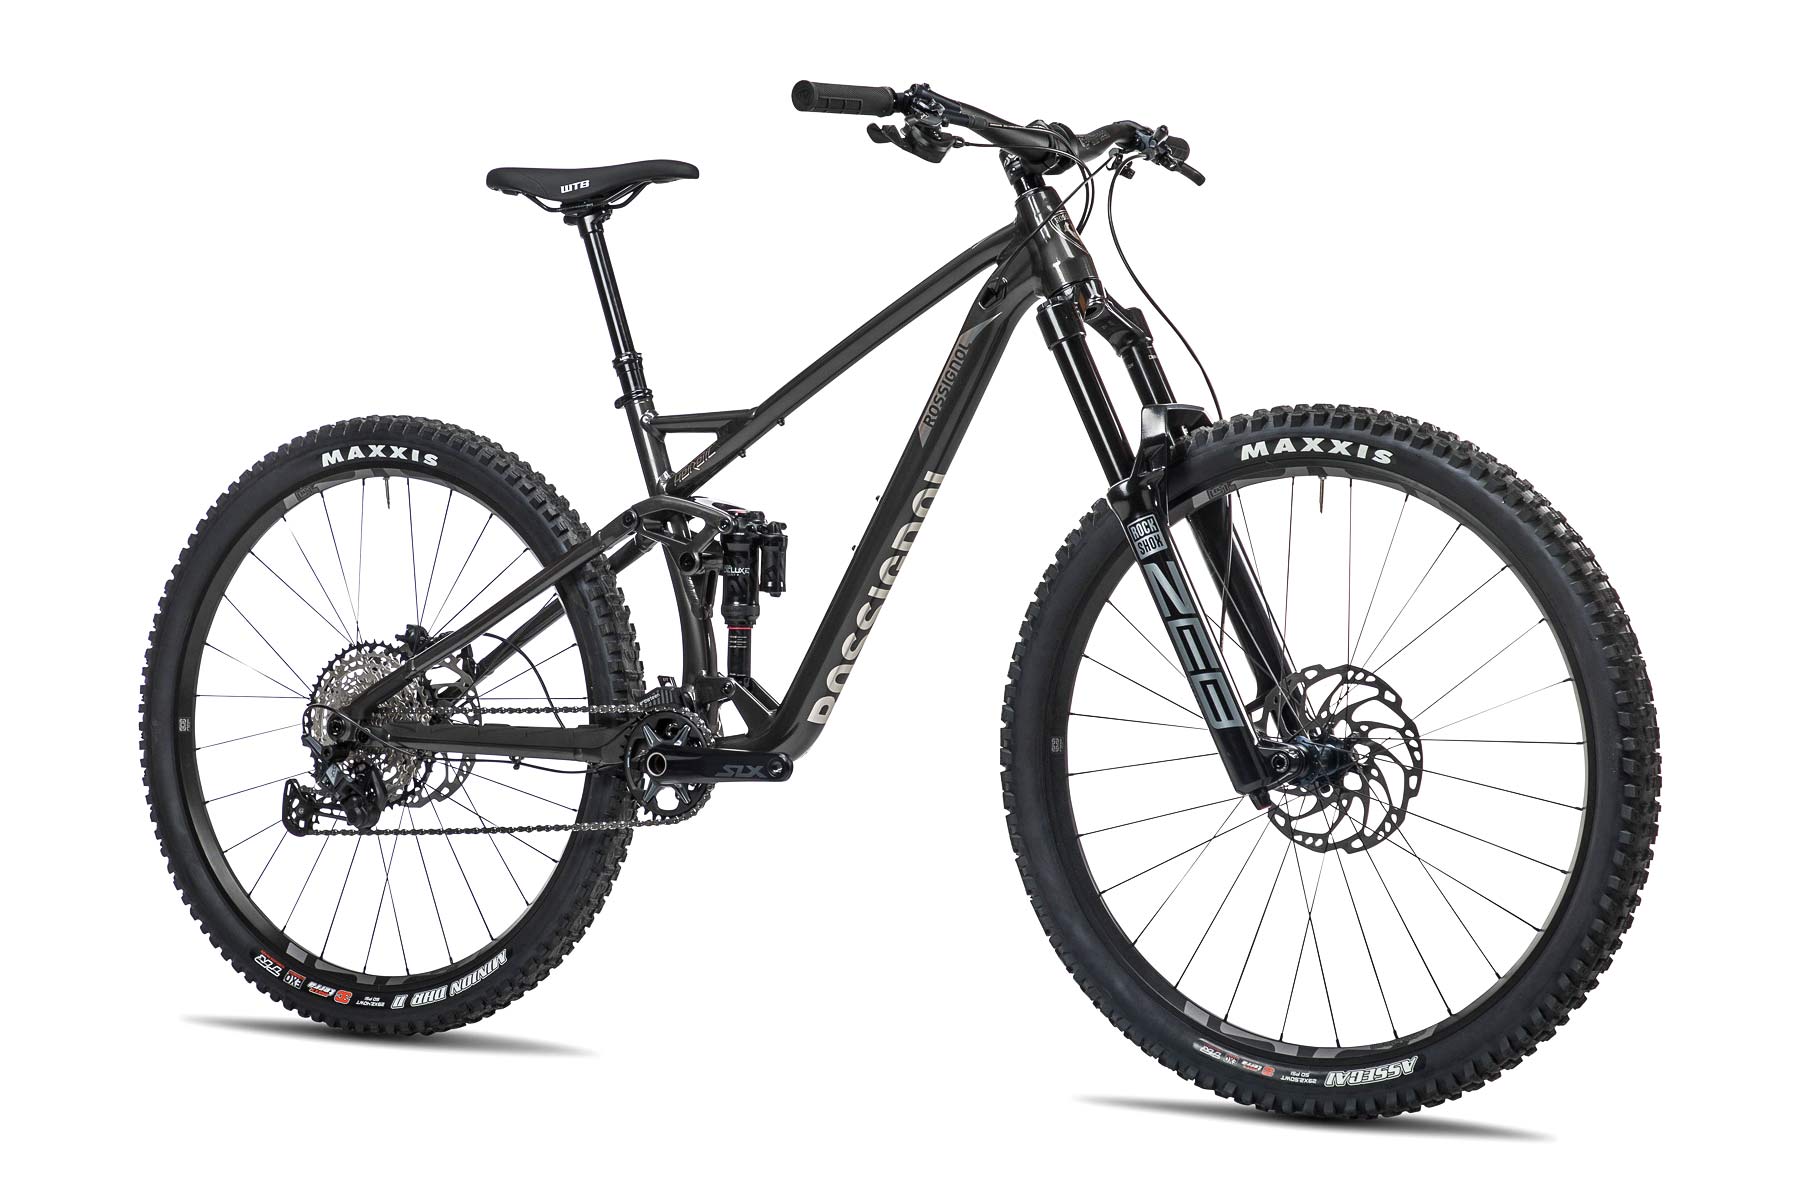 Affordable 2022 Rossignol alloy mountain bikes, Heretic angled